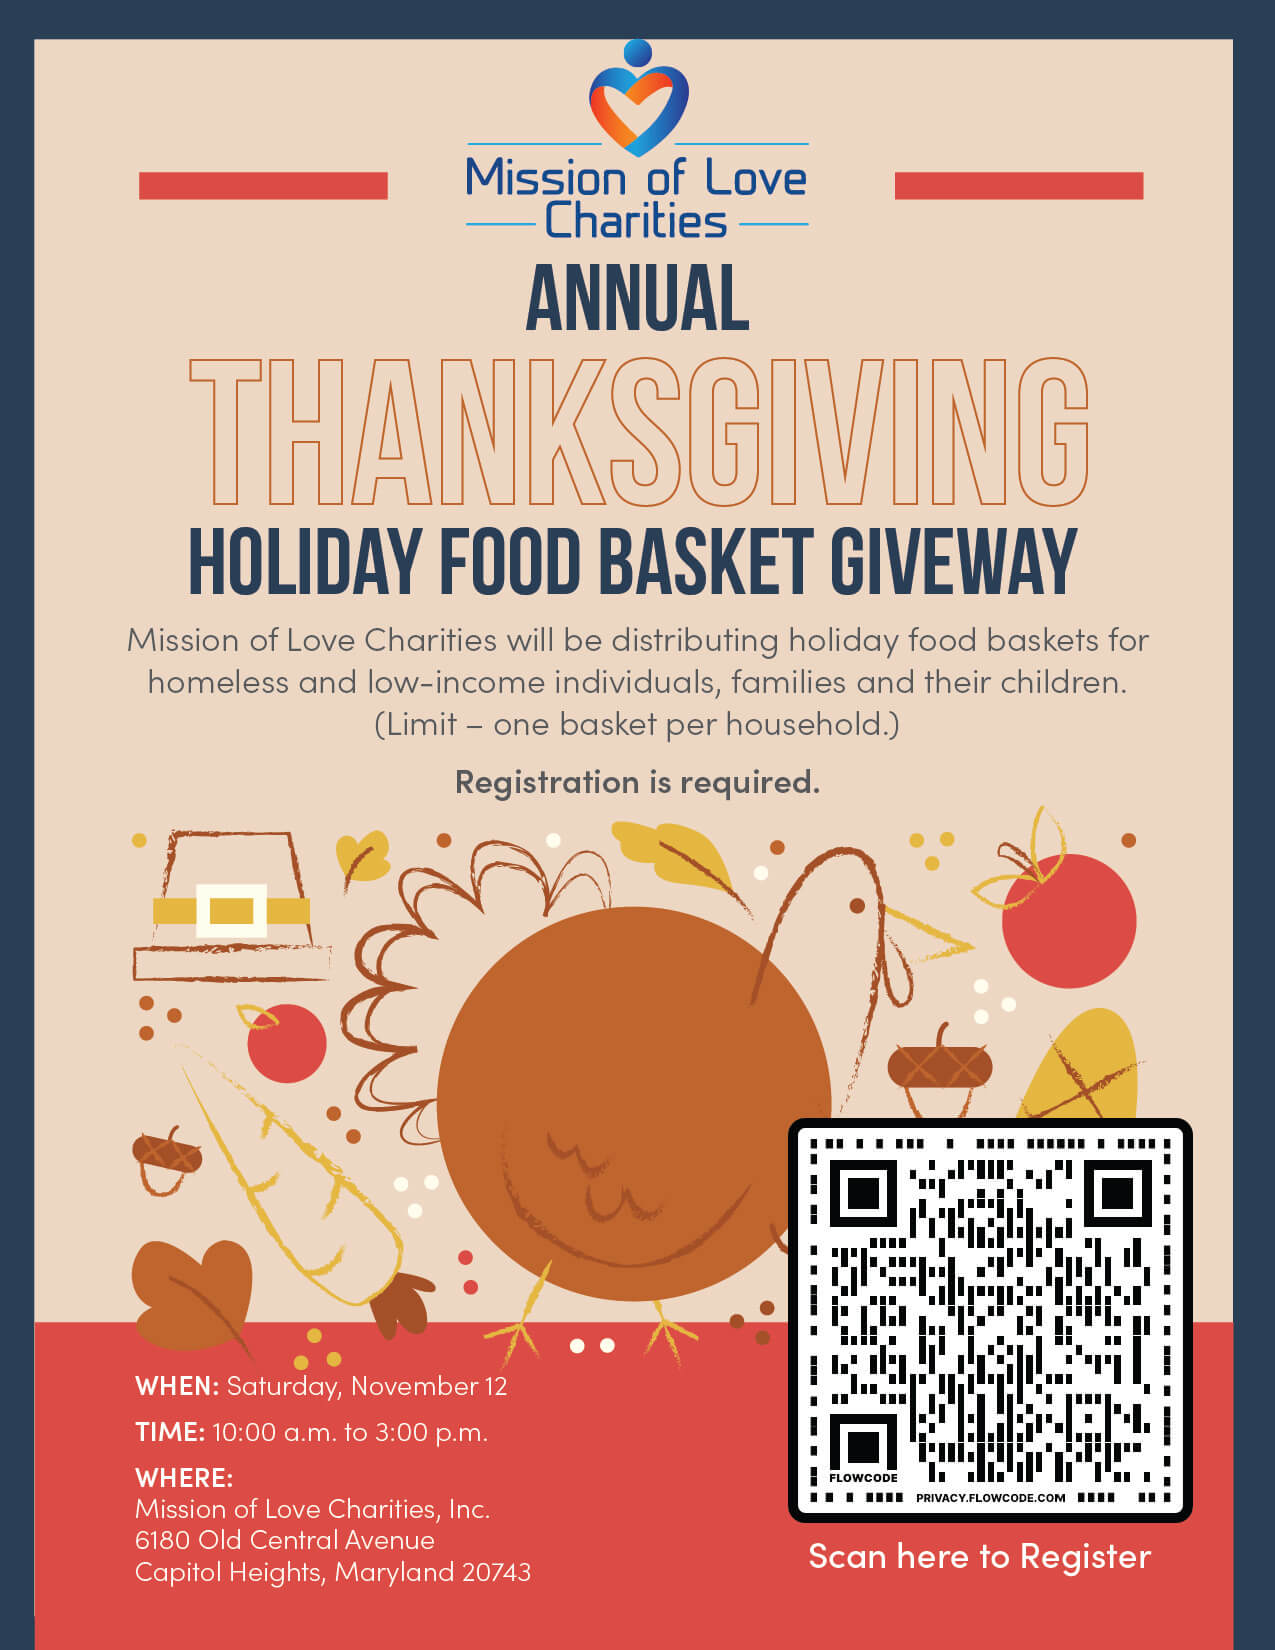 Annual Thanksgiving Holiday Food Basket Giveaway